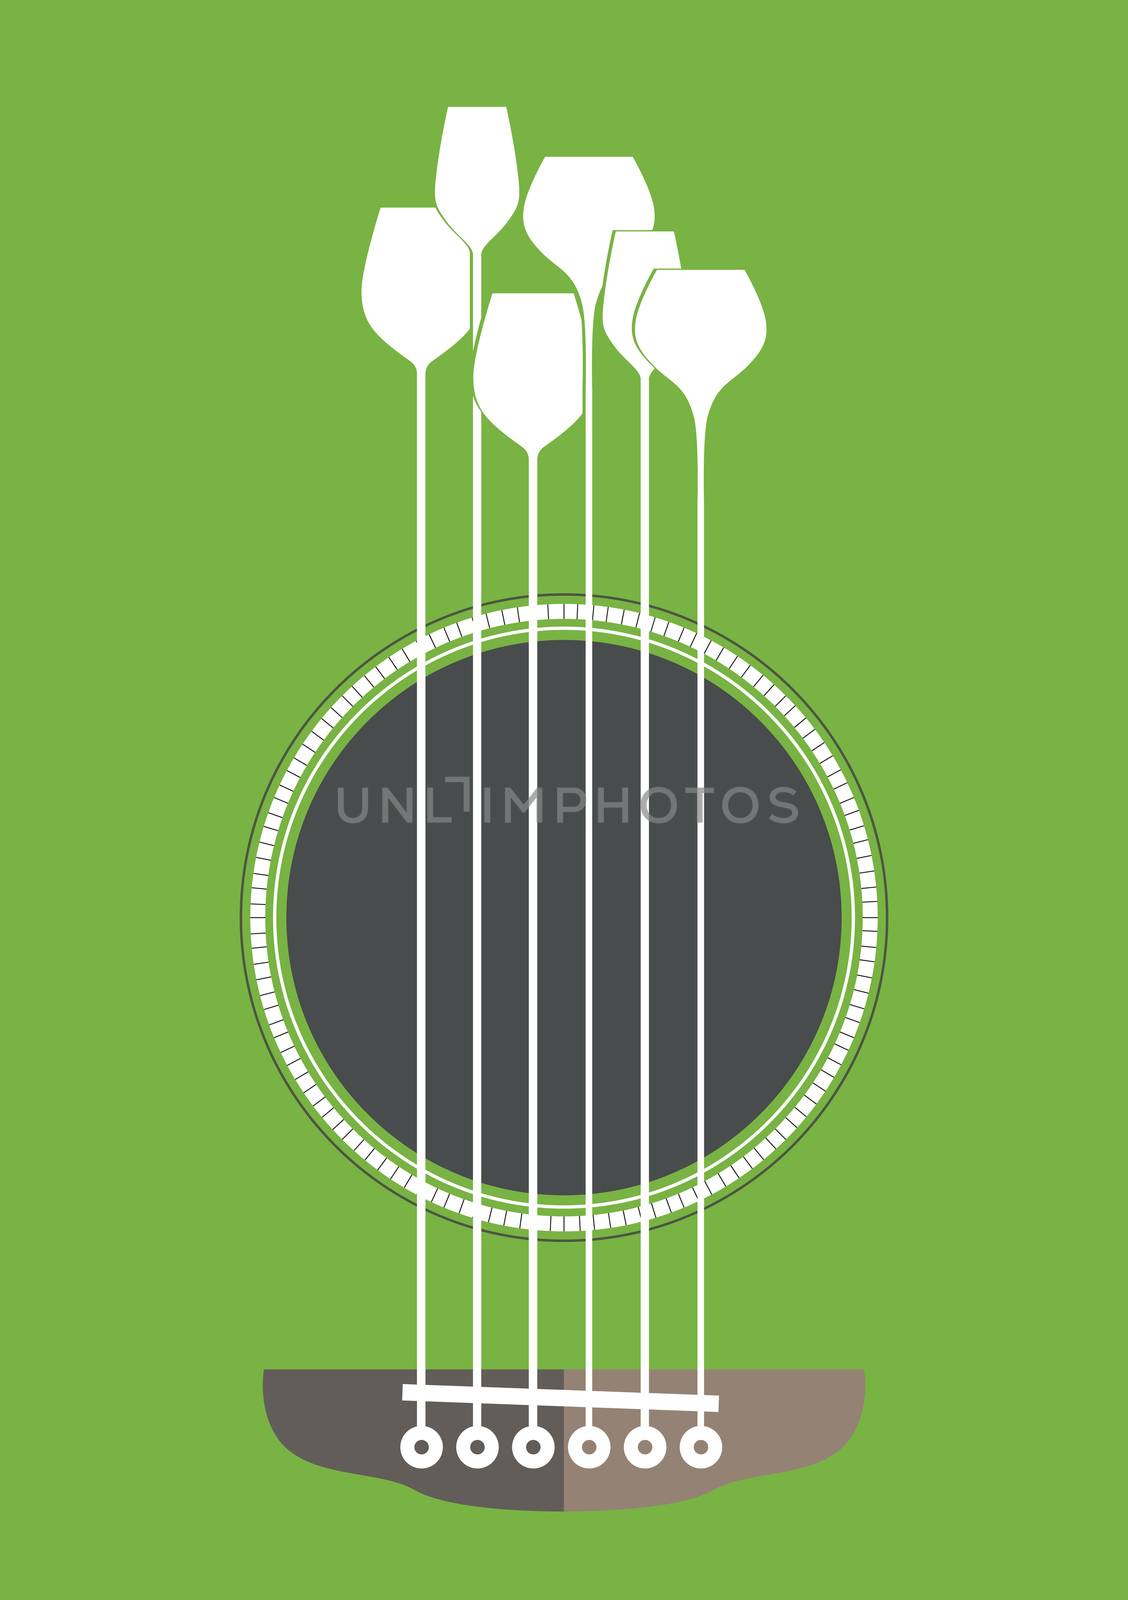 Conceptual creative illustration with acoustic guitar hole and wine glasses as the strings